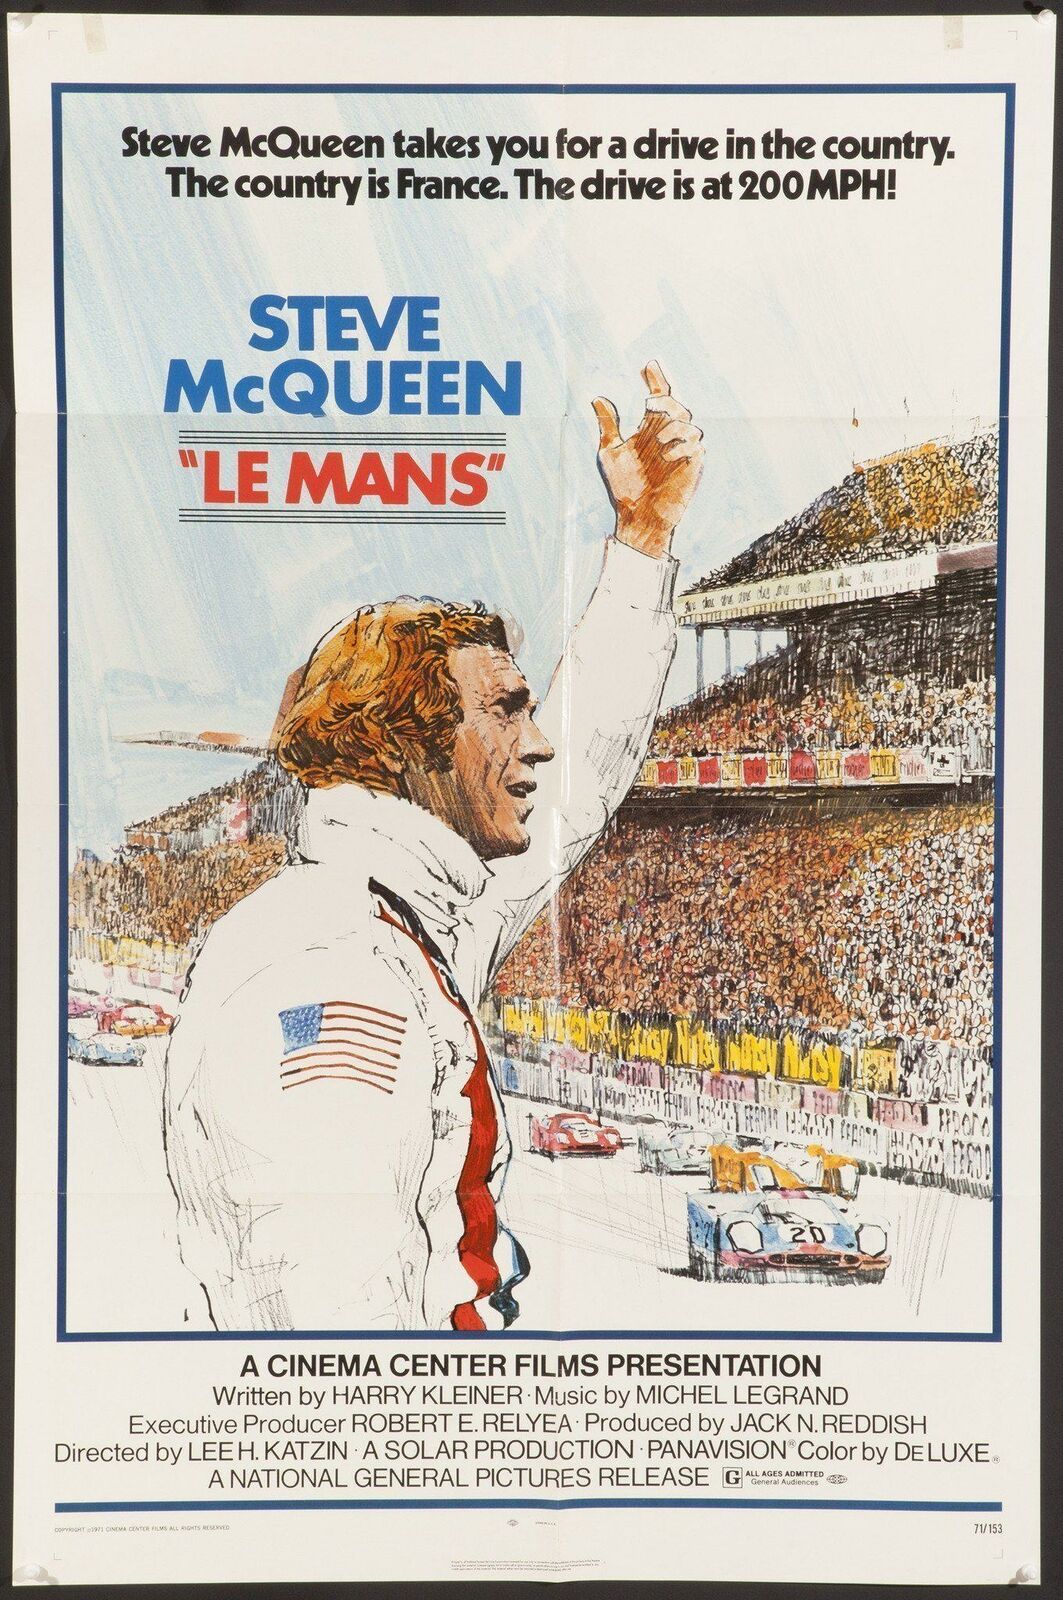 Le Mans Steve Fixed price for sale McQueen 35mm Film Rare Cell Ranking TOP1 var_q very strip